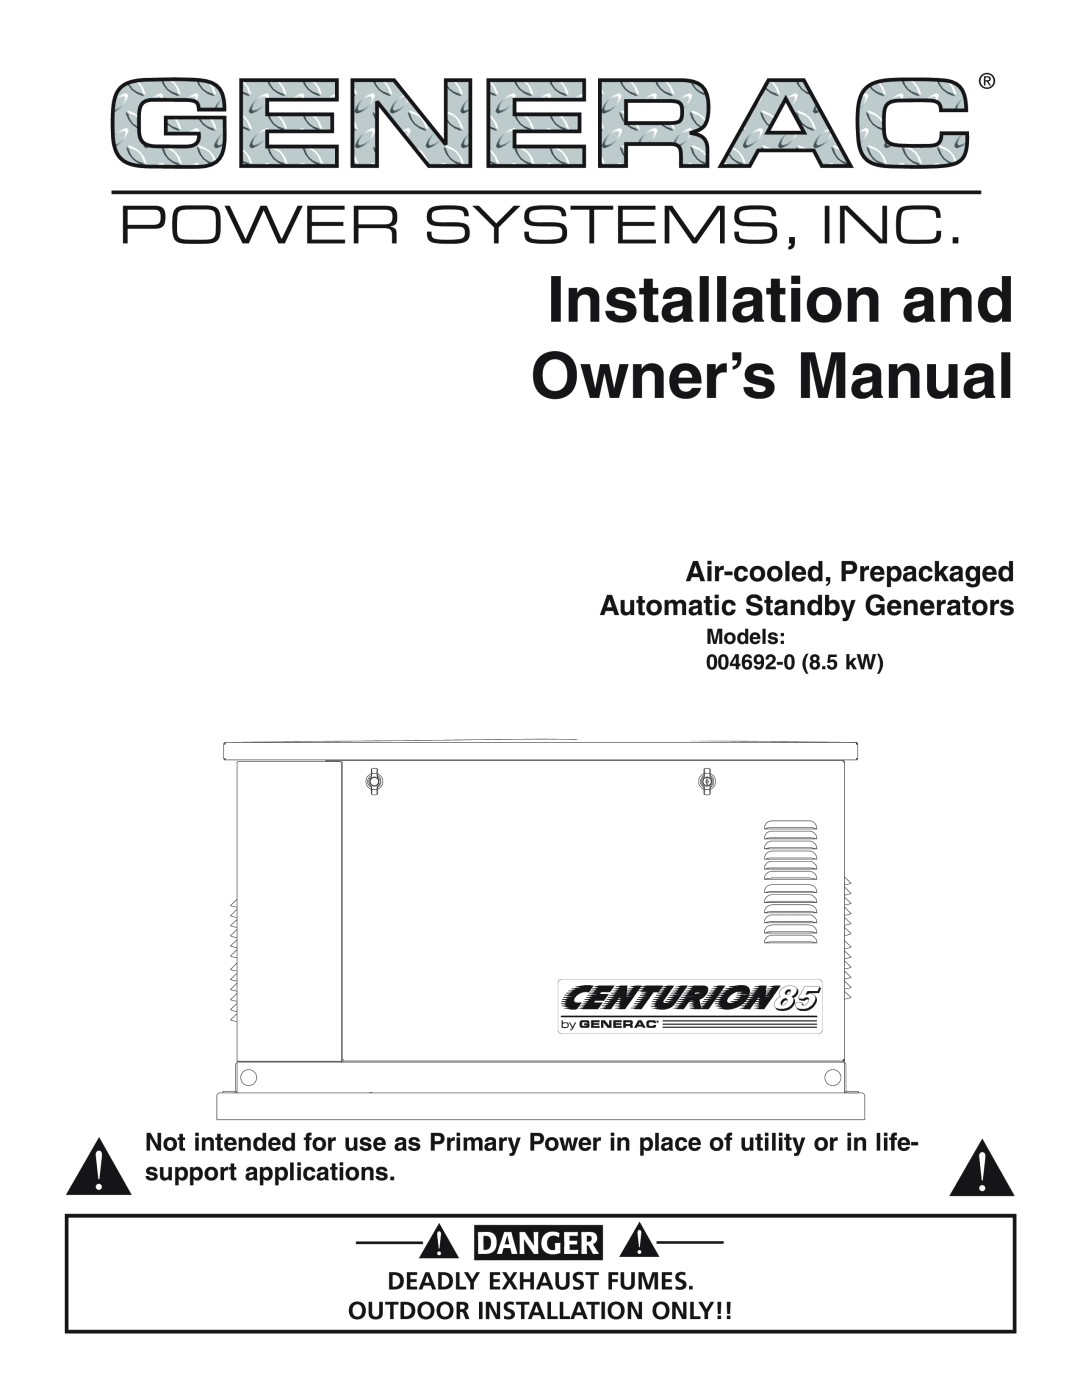 Generac 004692-0 owner manual Installation and Owner’s Manual, Power Systems, Inc, Danger, Air-cooled,Prepackaged 